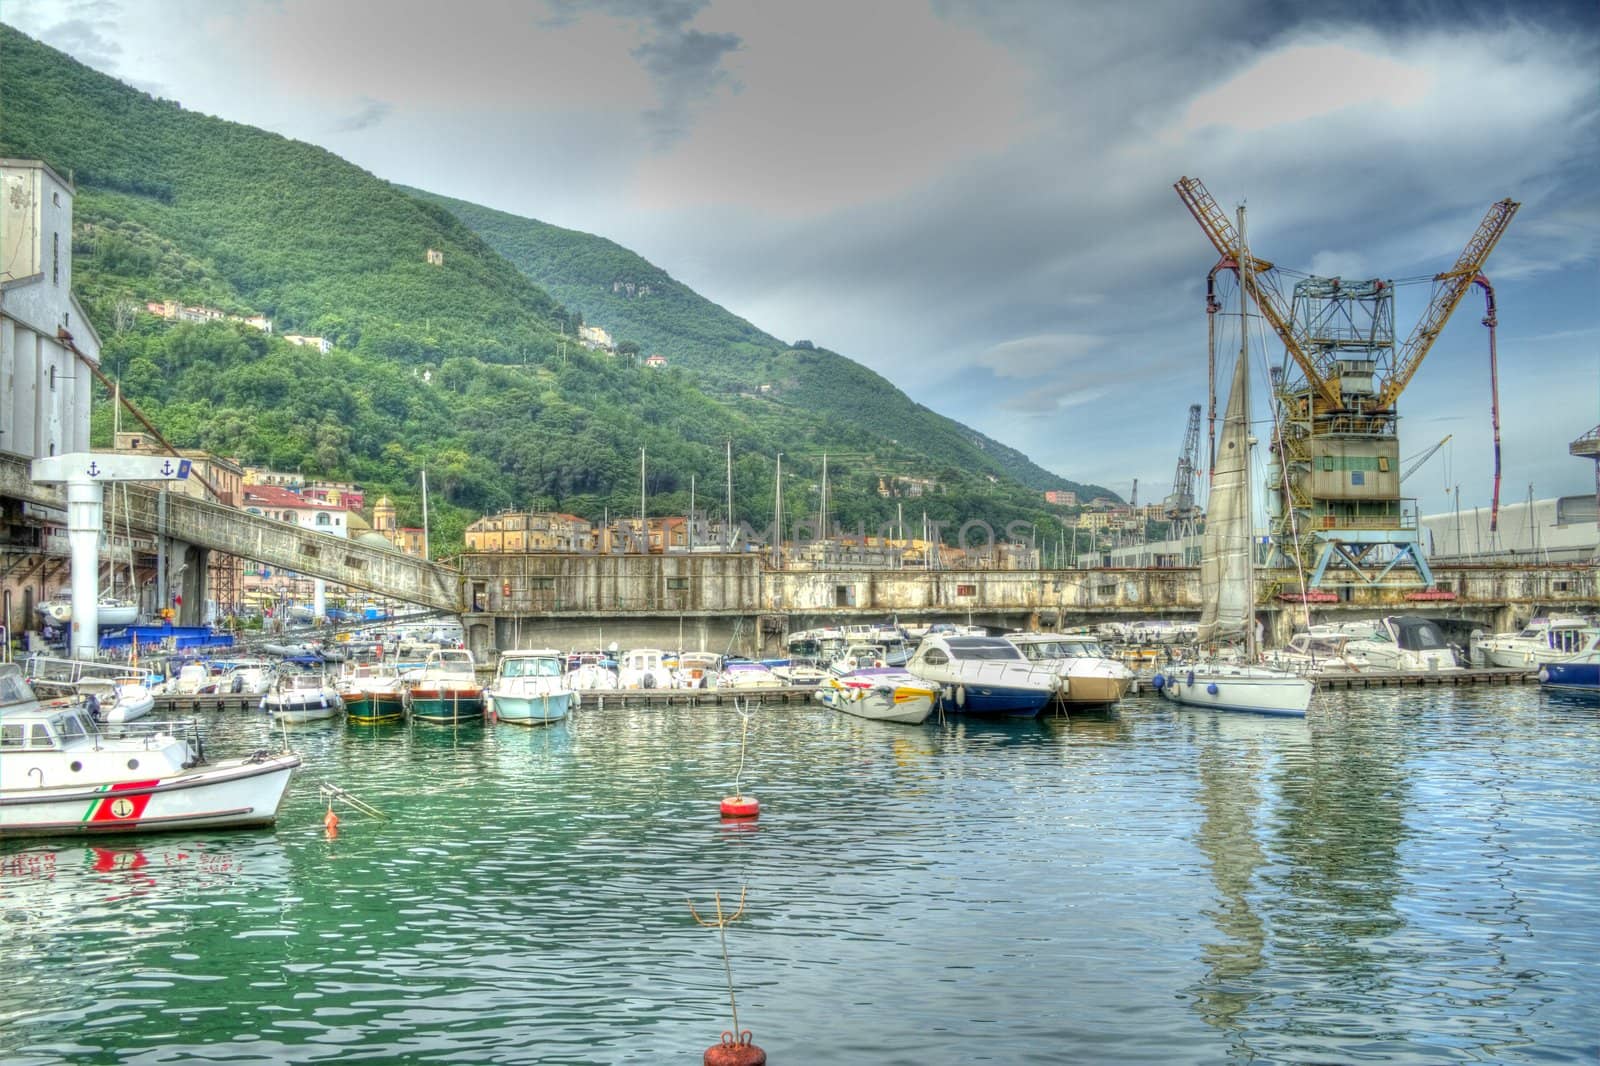 The hobor at Castellammare di Stabia shoot in HDR.